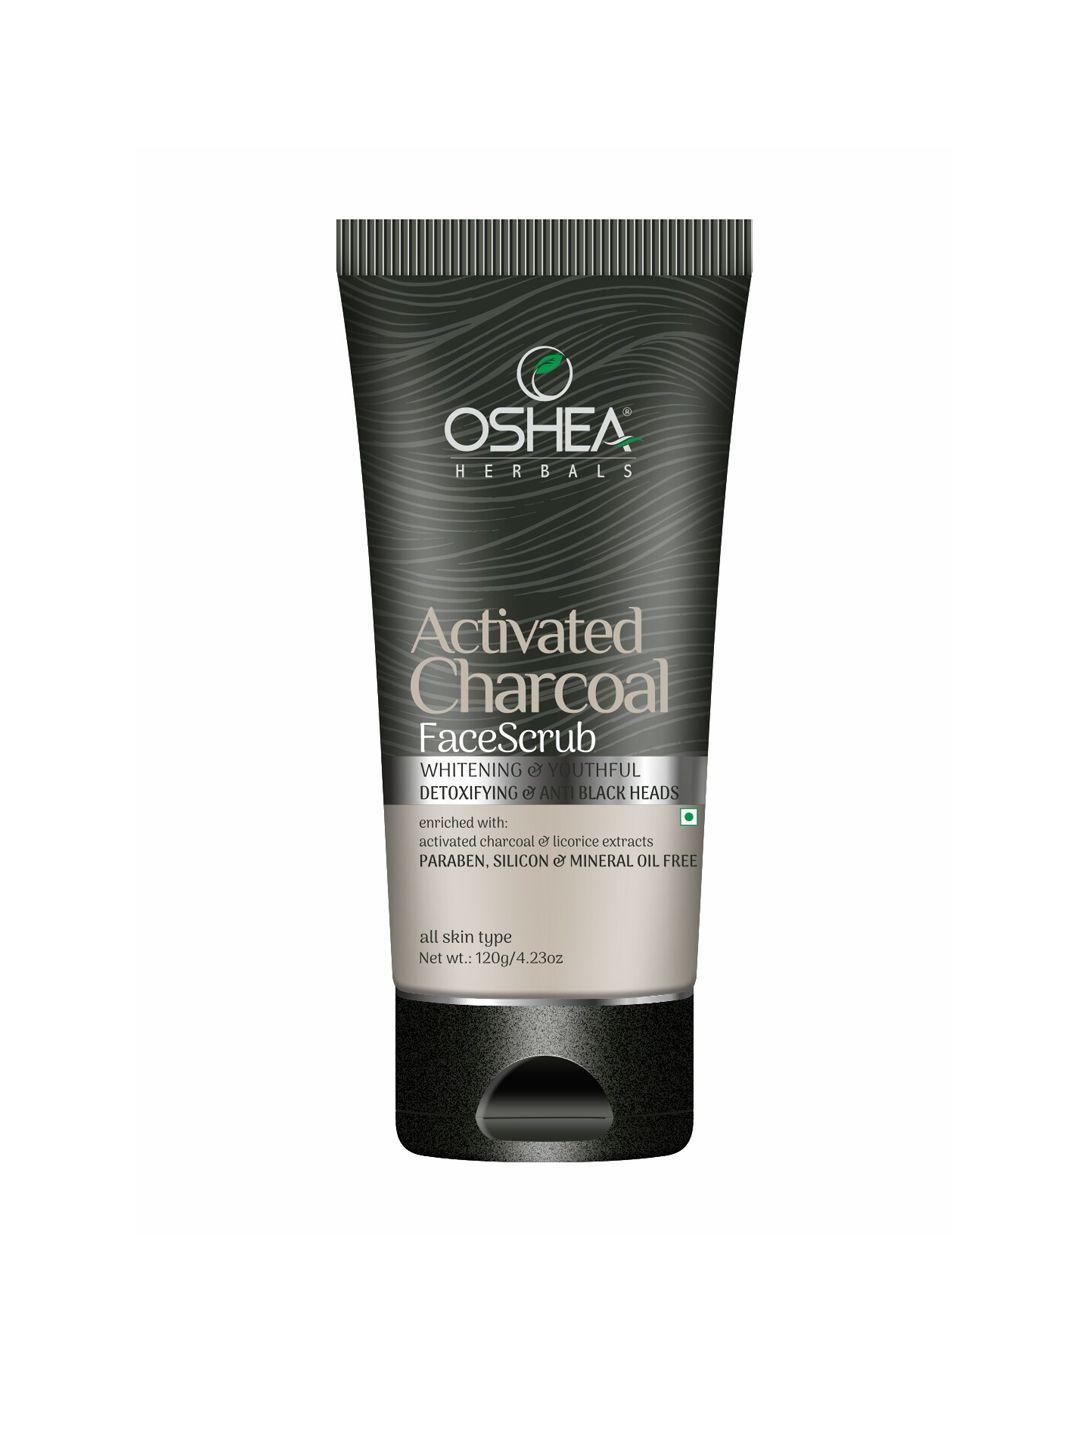 oshea herbals activated charcoal anti blackheads face scrub